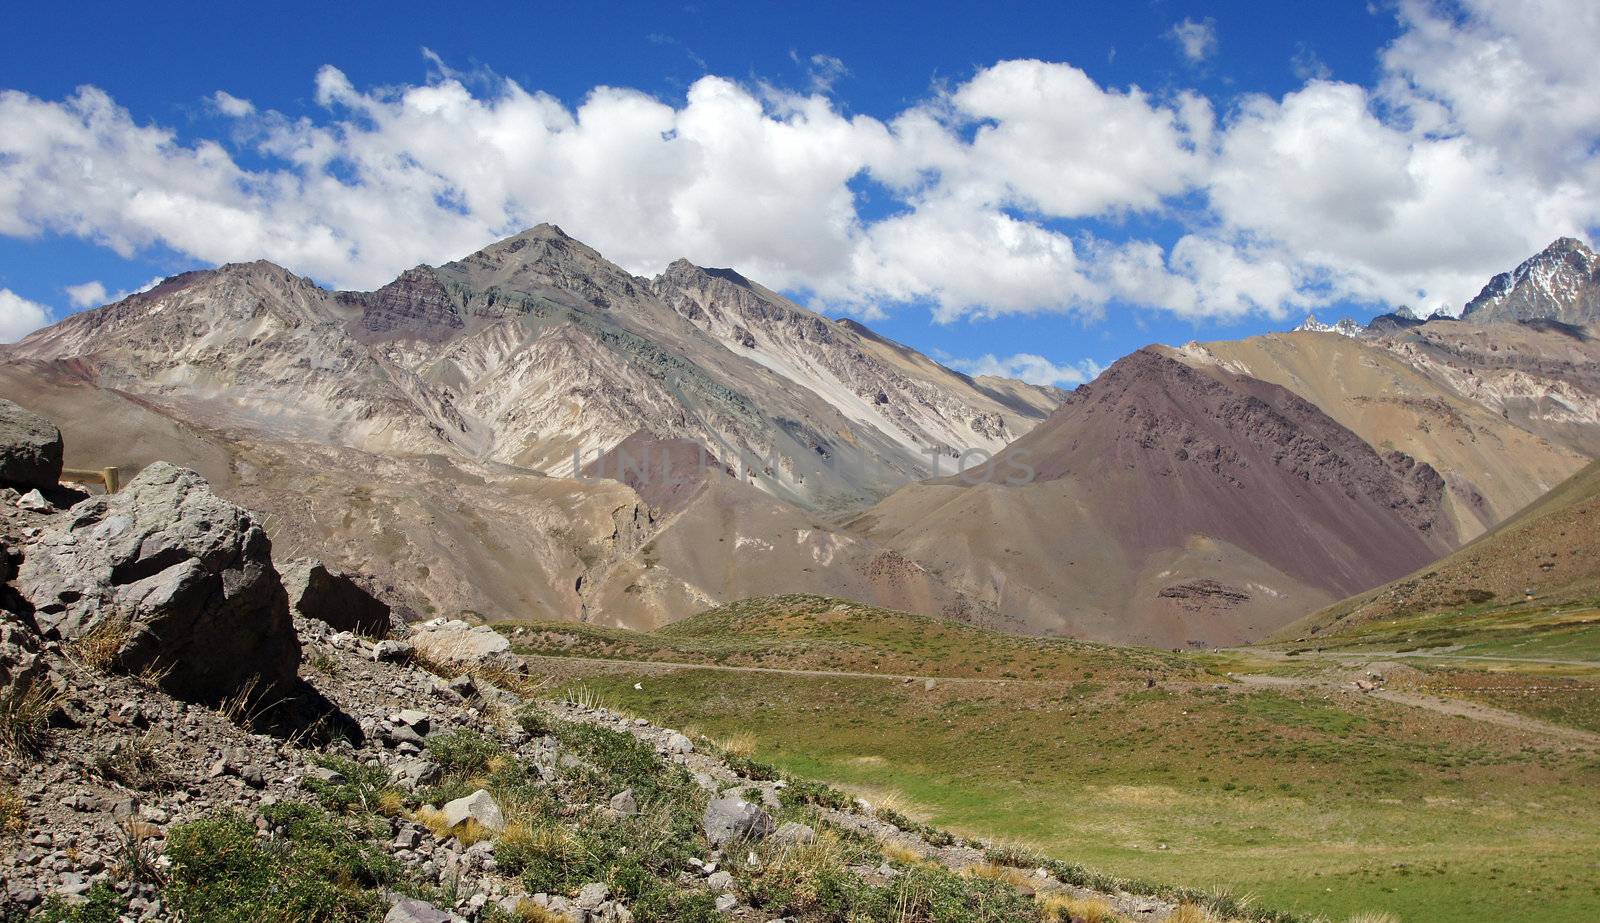 Landscape within the Aconcagua National Parc, Andes Mountains, Argentina